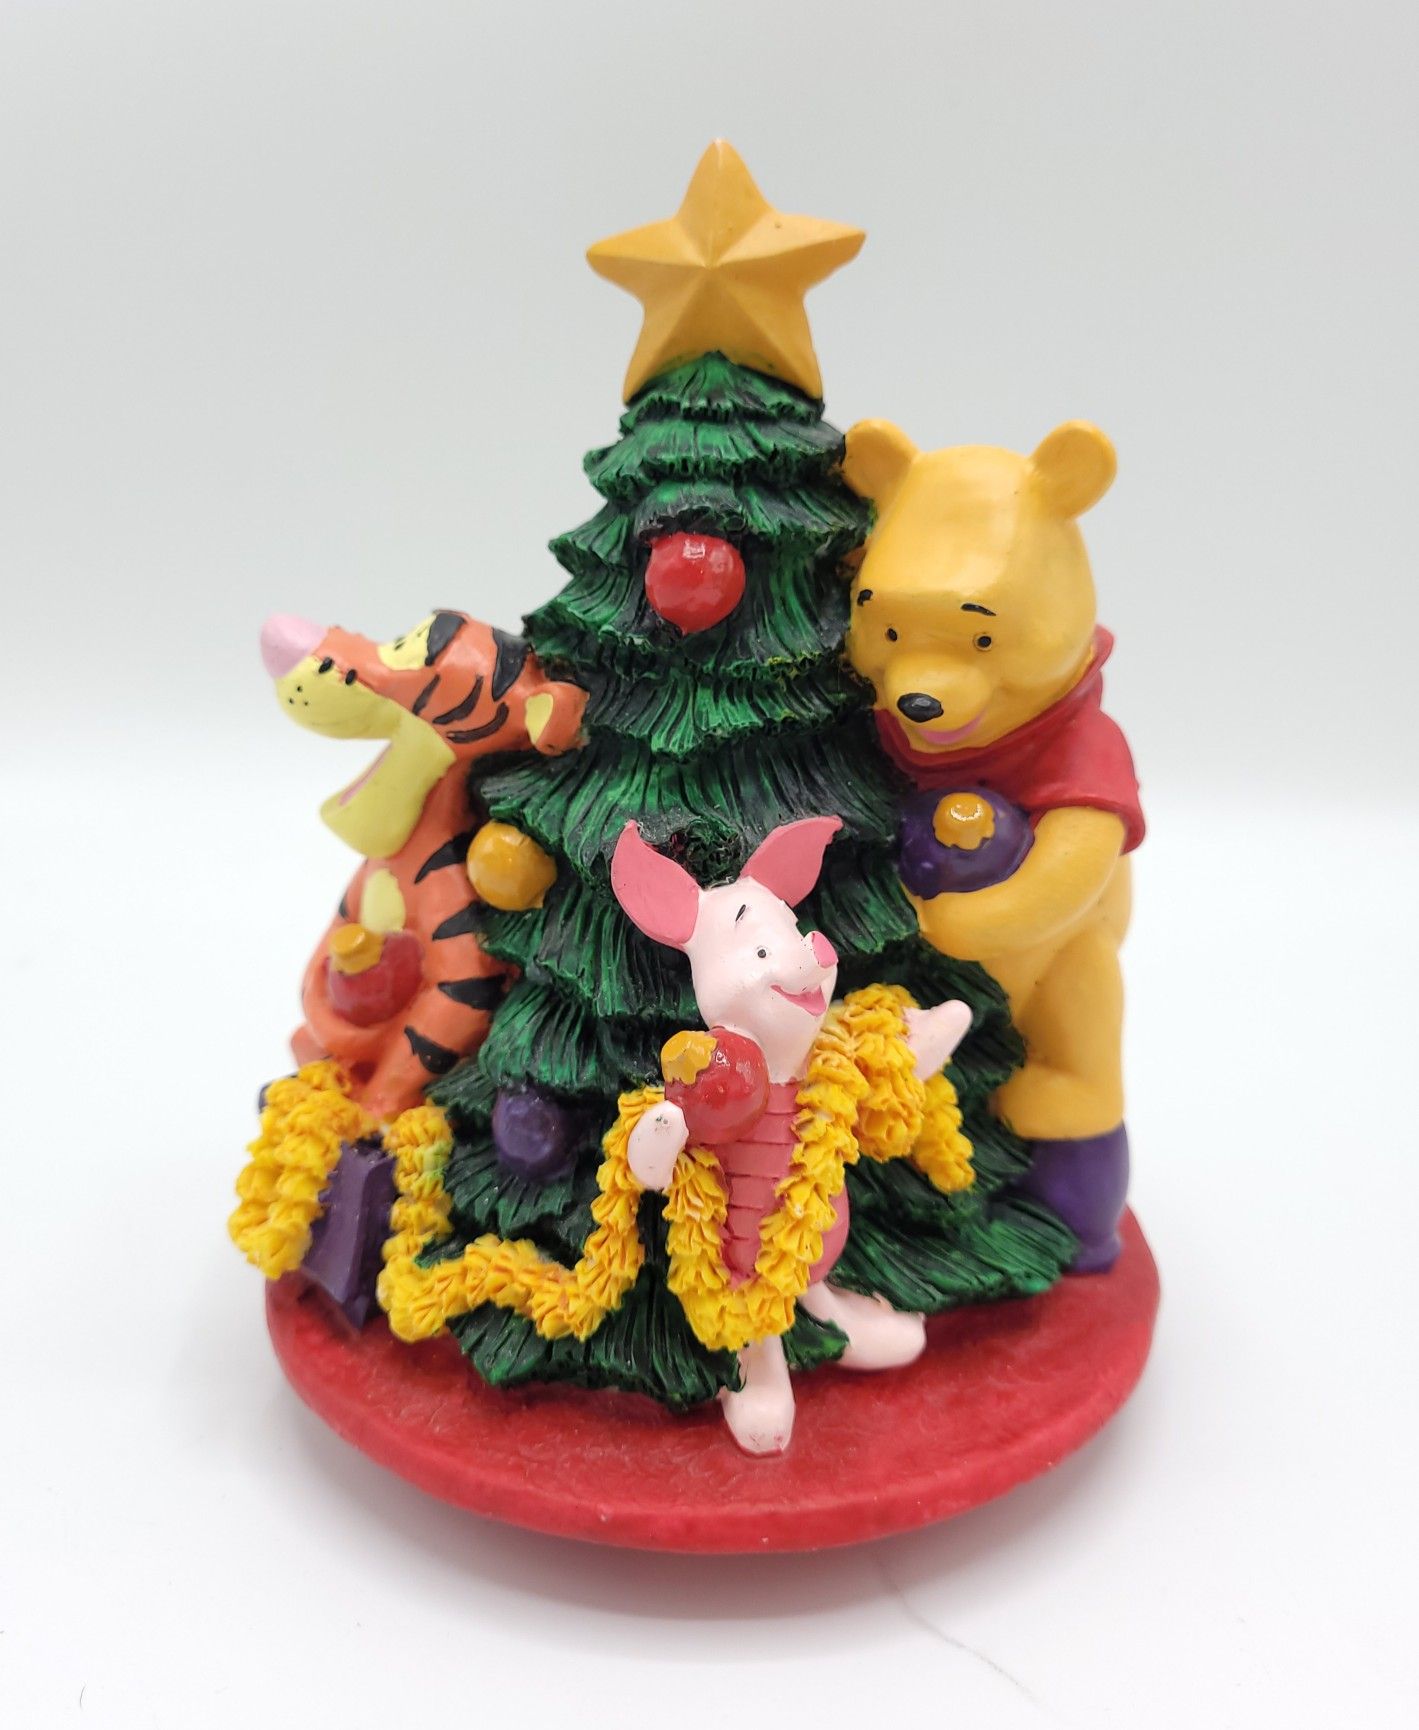 Winnie The Pooh and Friends Trimming the Christmas Tree